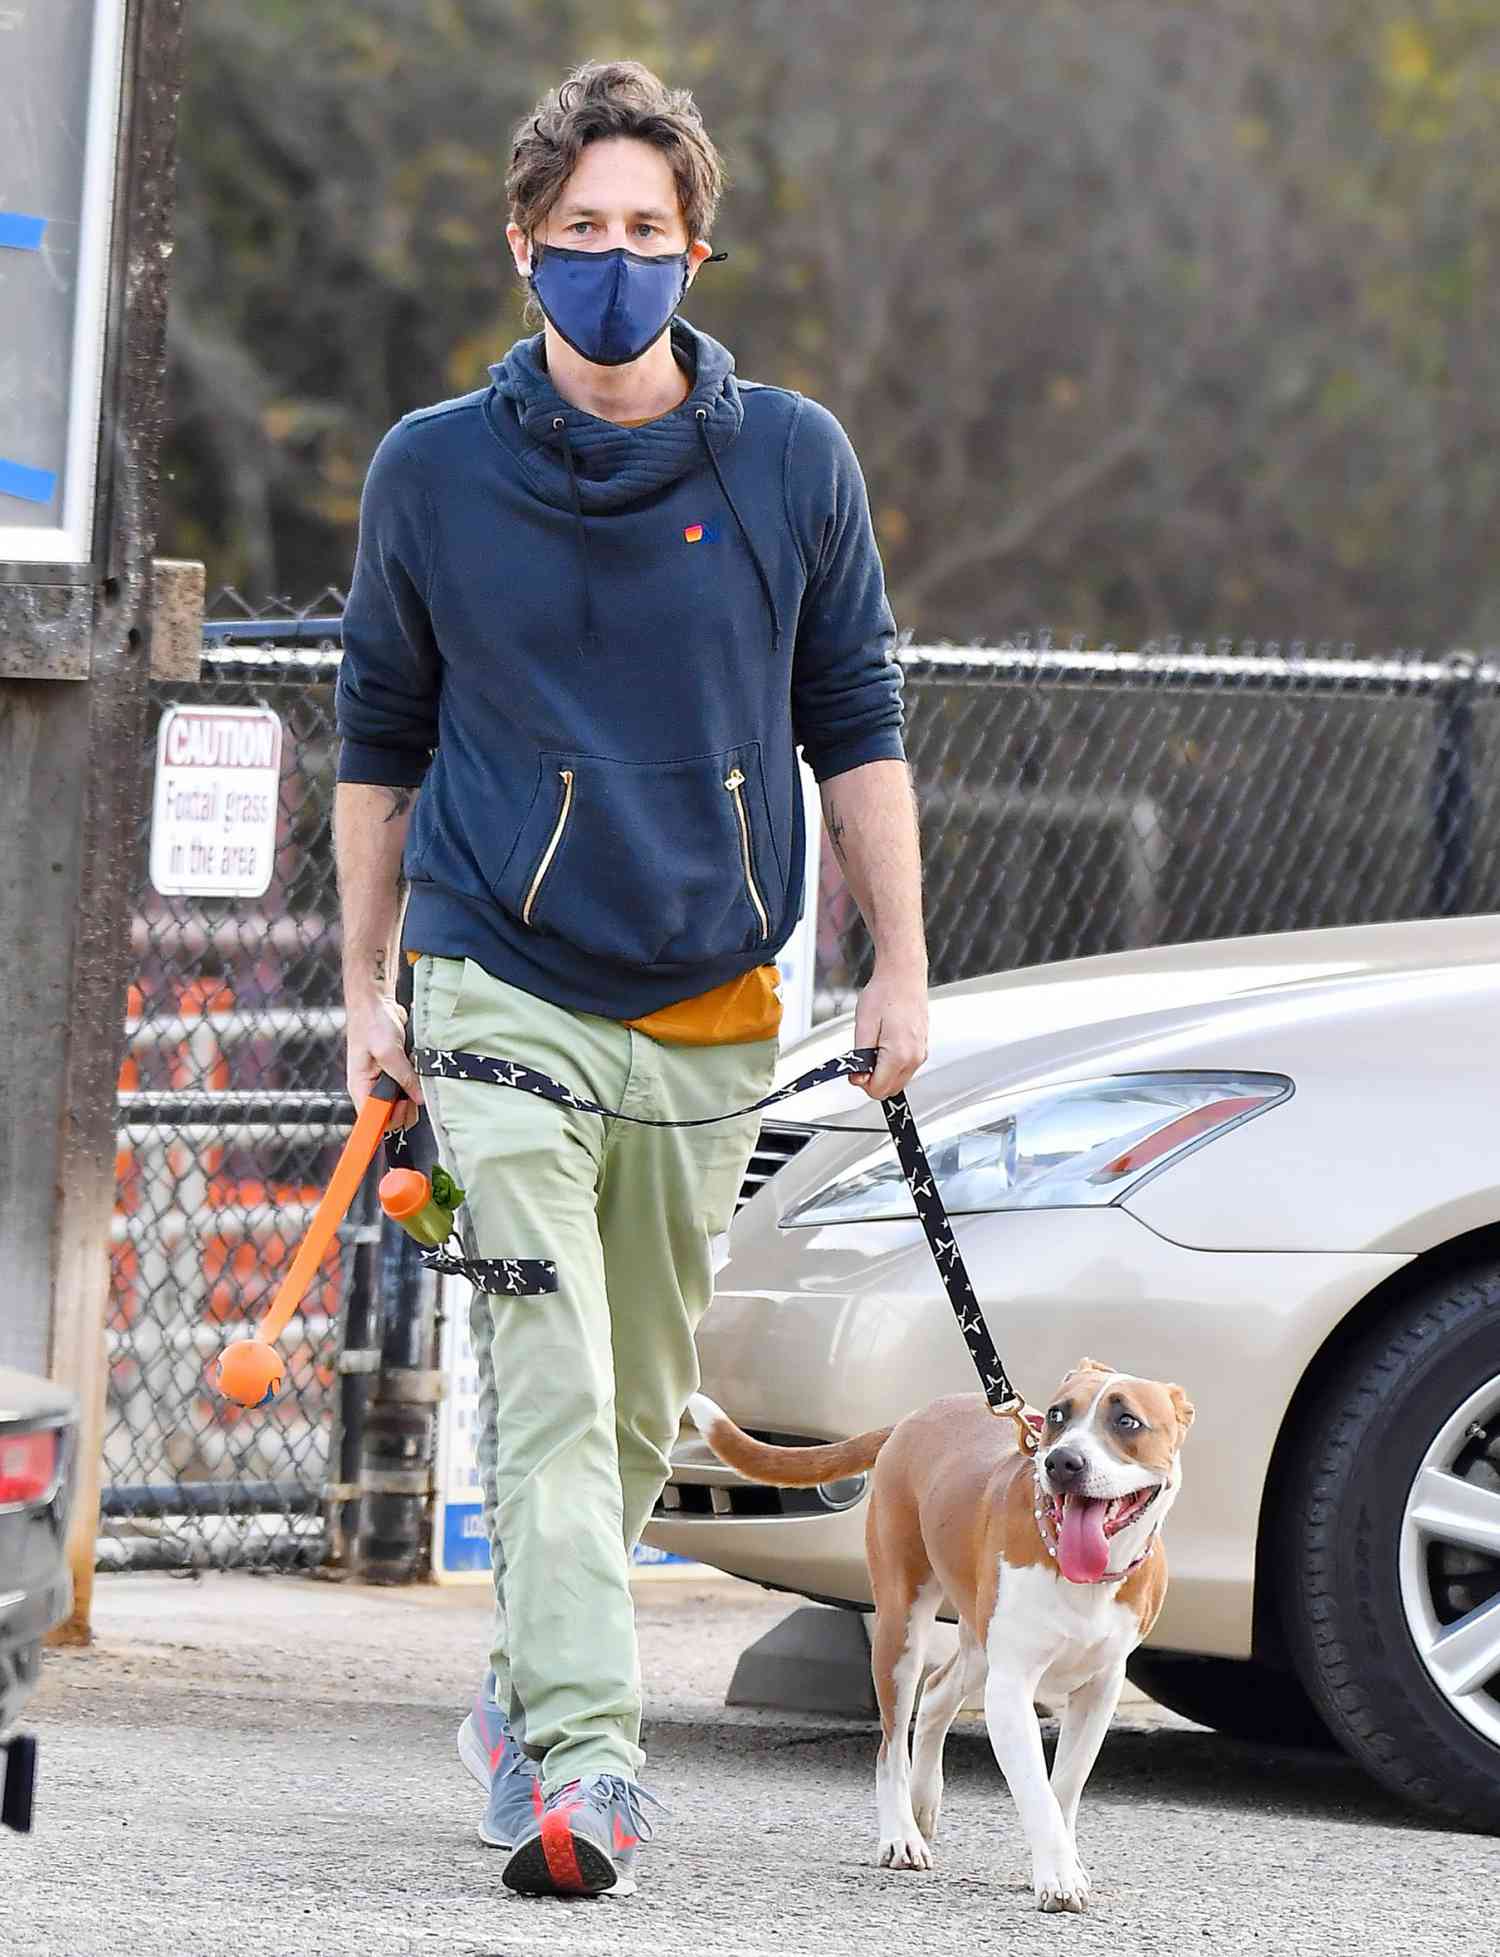 Zach Braff Takes His Very Excited Dog To His Local Dog Park